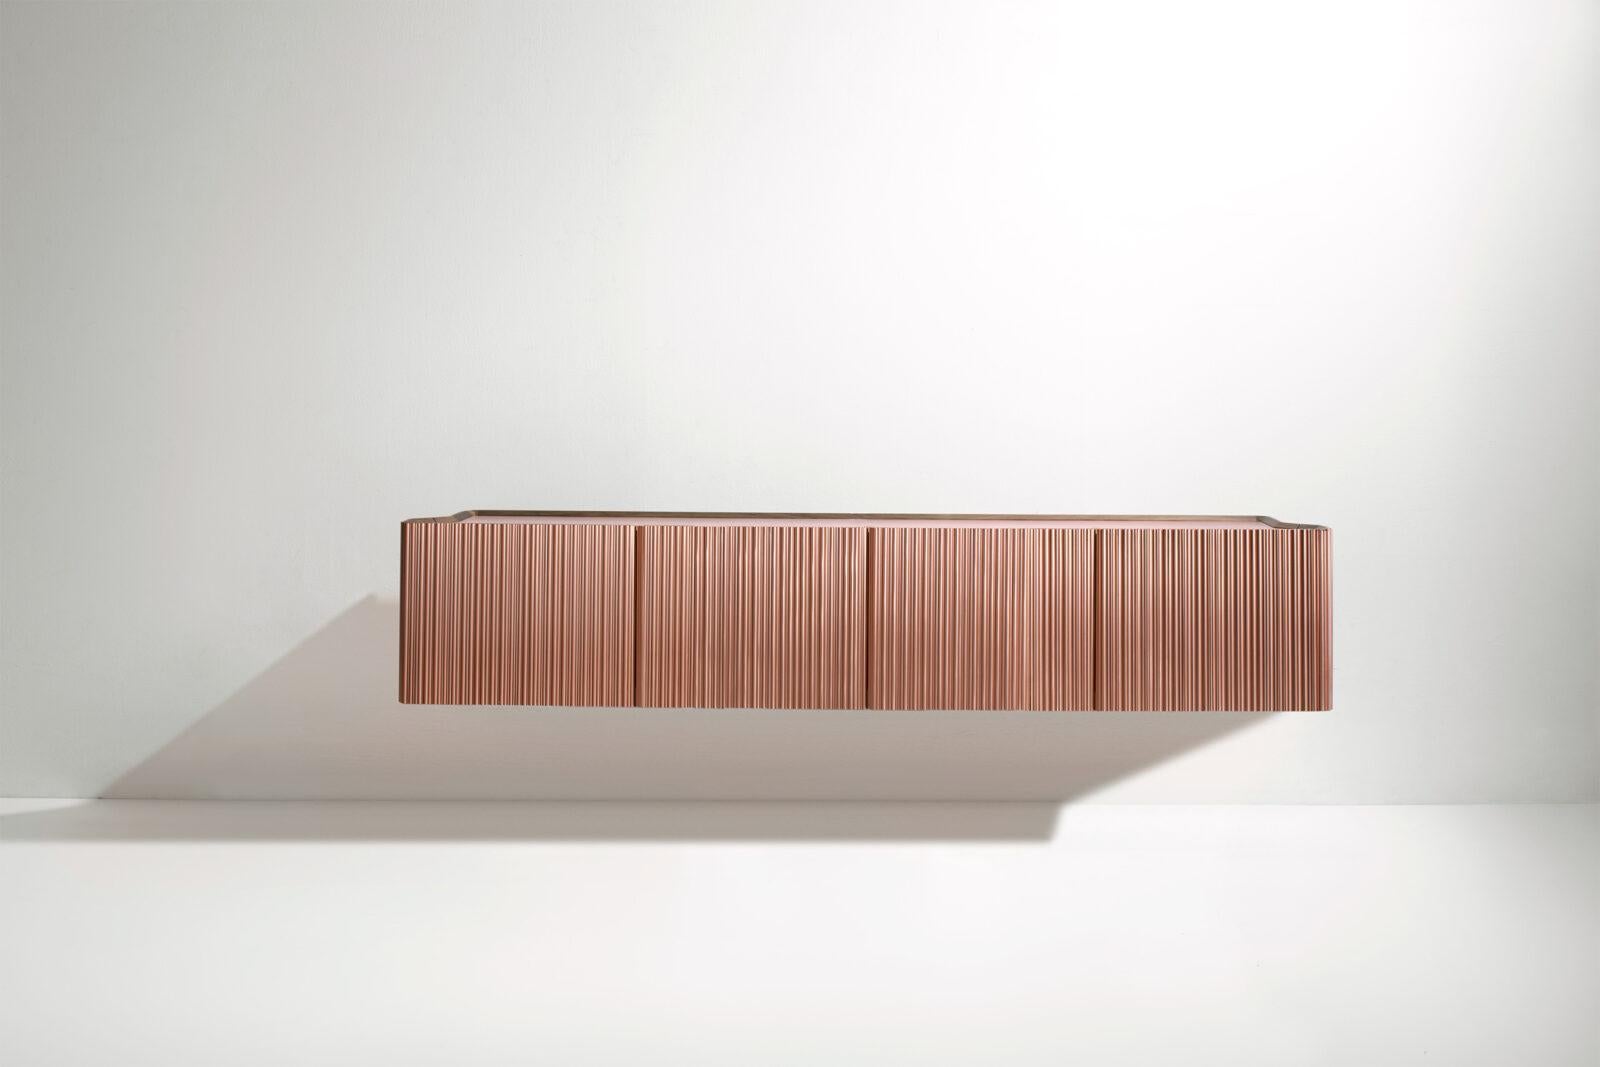 The sculptural surface is defined by fluting composed of vertical rods of different sizes in brushed metal, creating irregular undulations and a fascinating interplay of reflections. Extending horizontally, it has two L-shaped doors that open at 90